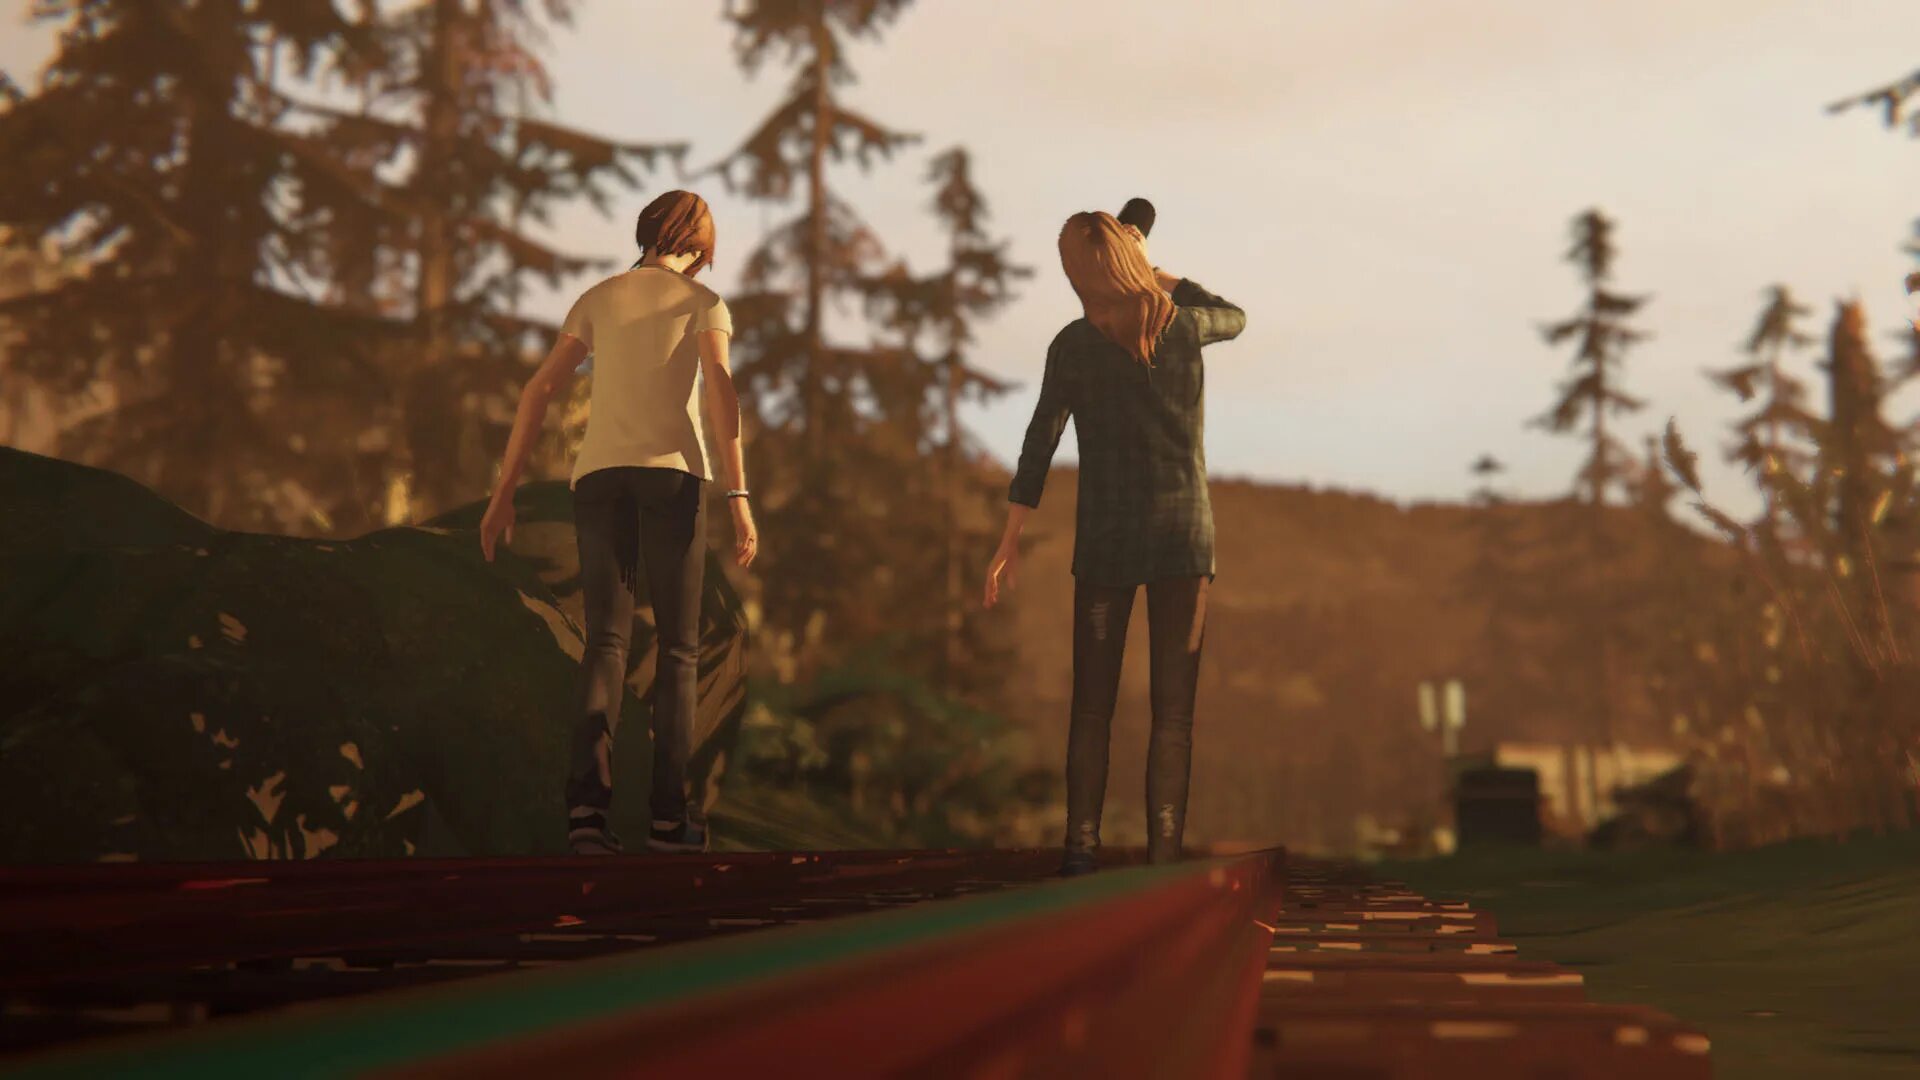 1wooxx life. Life is Strange: before the Storm. Life is Strange: before the Storm Wallpaper Рэйчел. Life is Strange before the Storm screenshots. Life is Strange BTS.